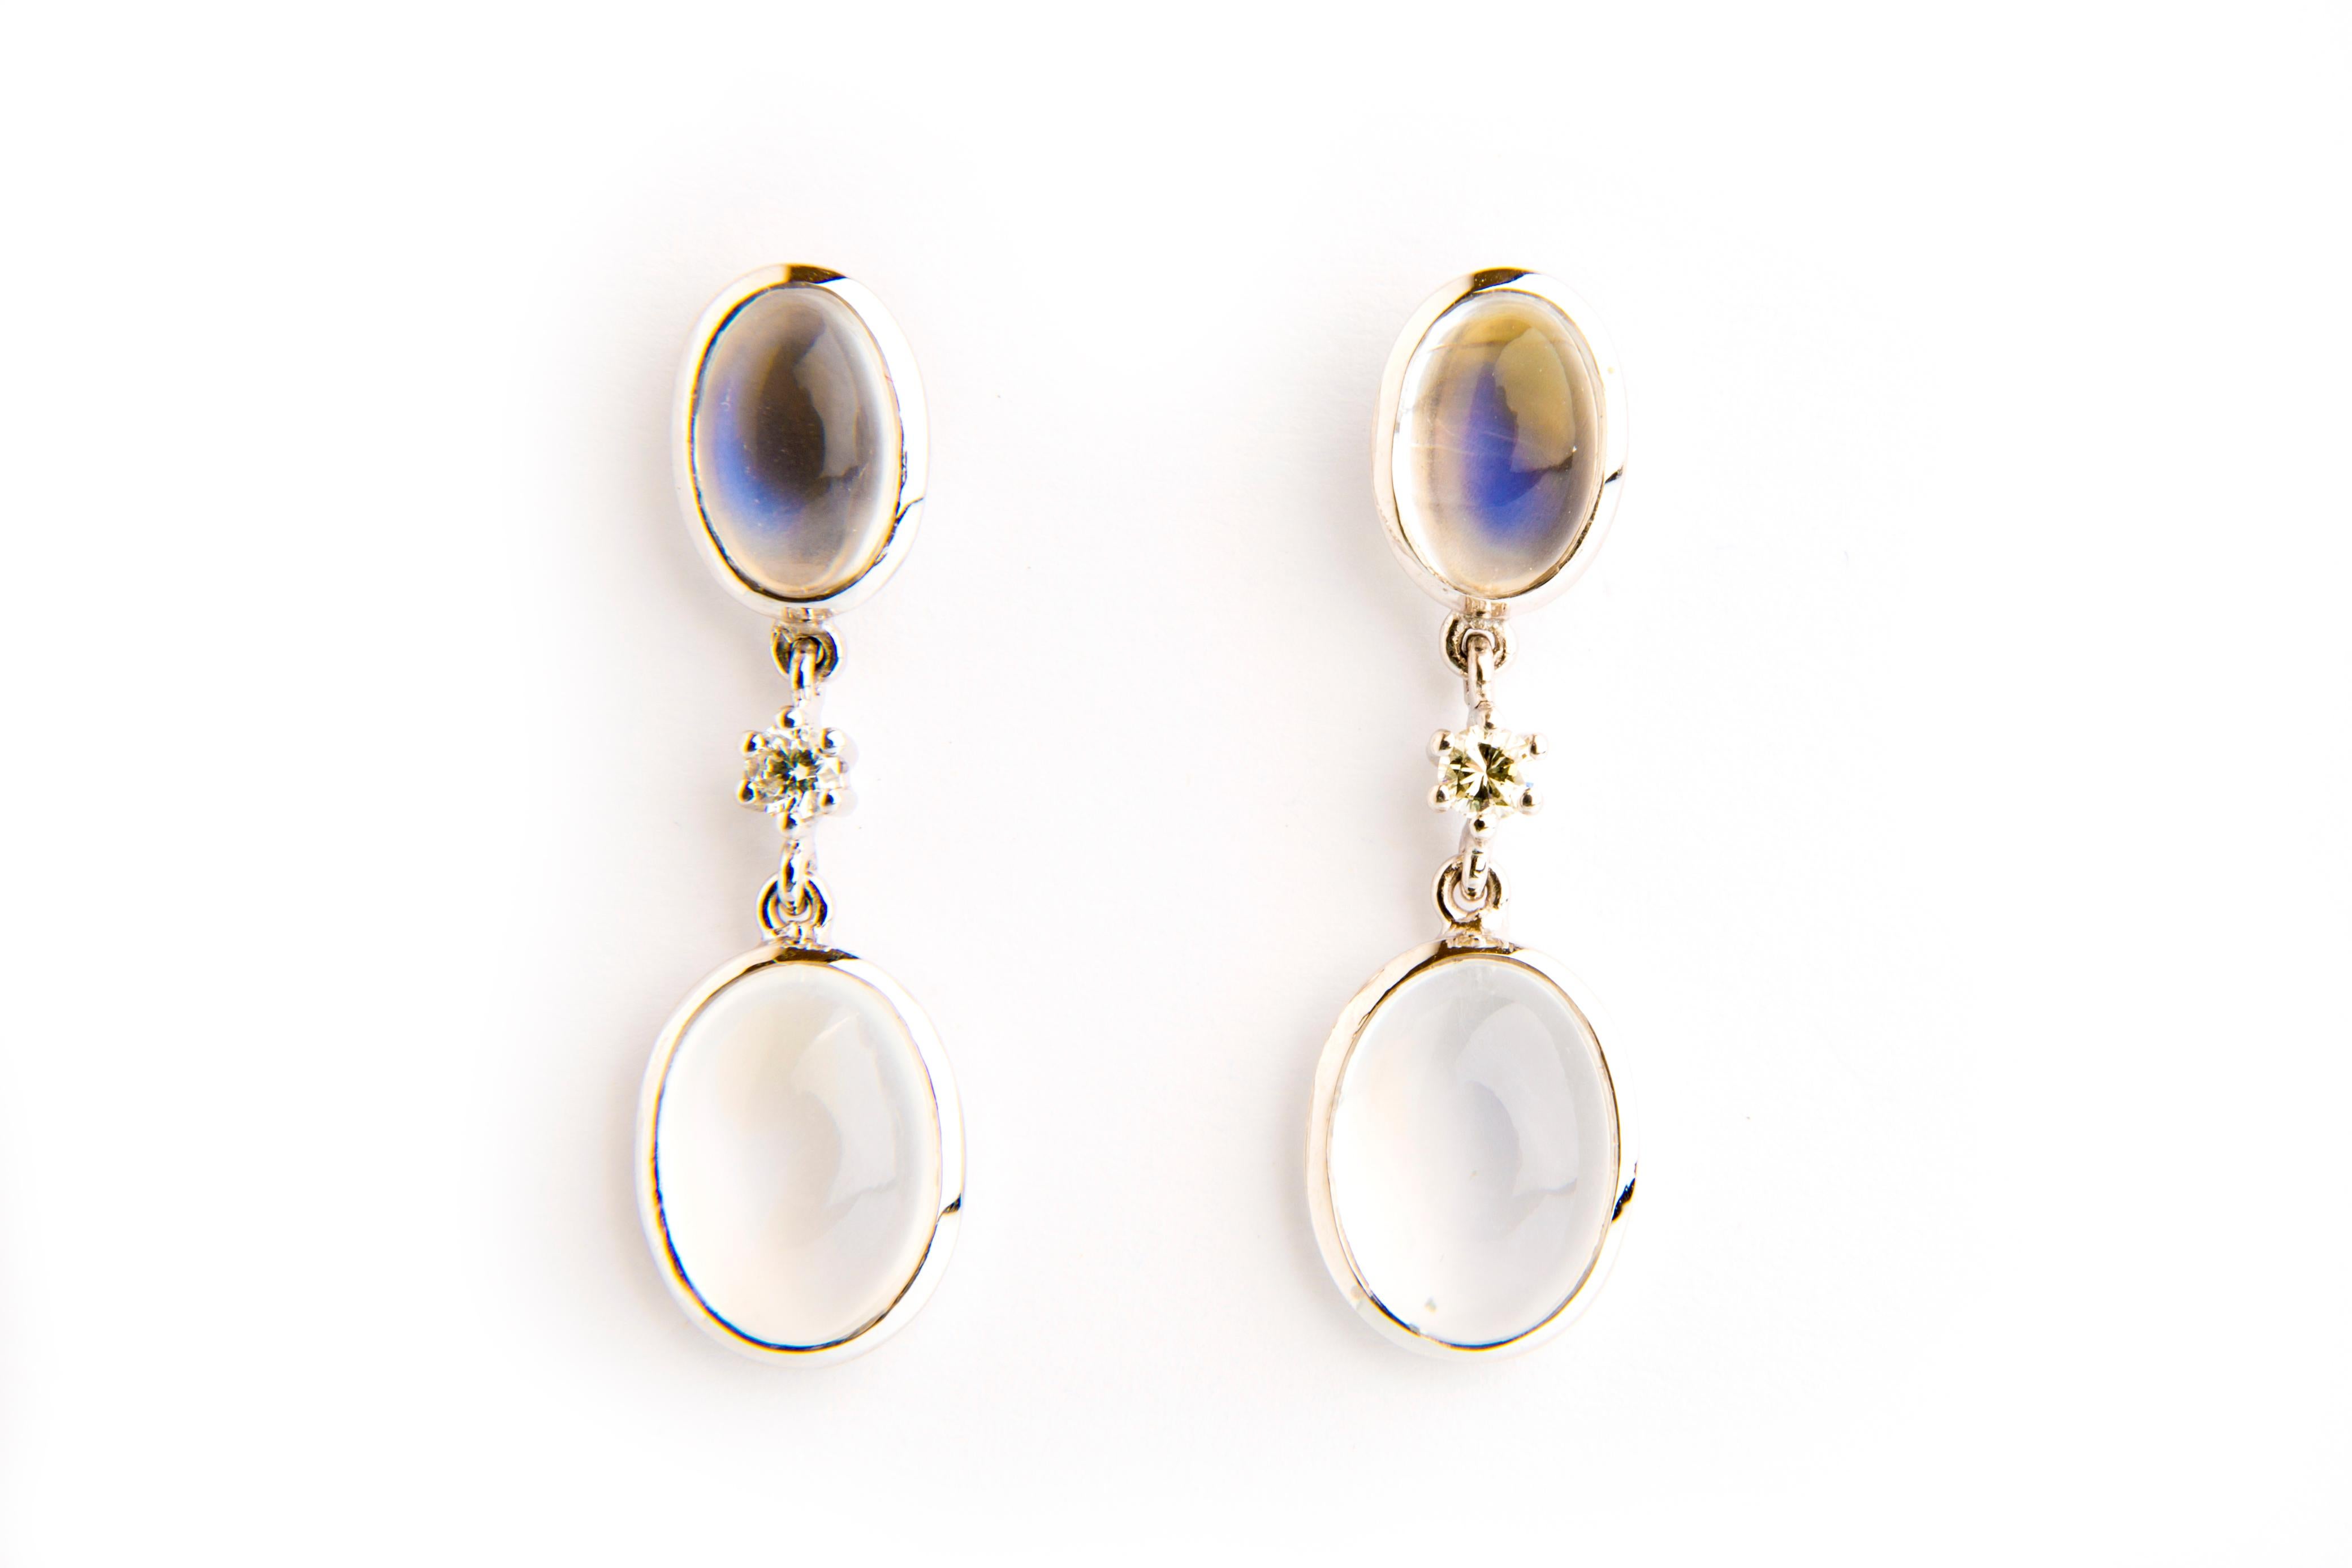 These absolute and unique earrings feature moonstones 10.58ct (4 stones) in a white gold 18k setting with diamonds 0.09ct. The reflection of light will enhance the powerful colors of each stone revealing their inner beauty. They could perfectly